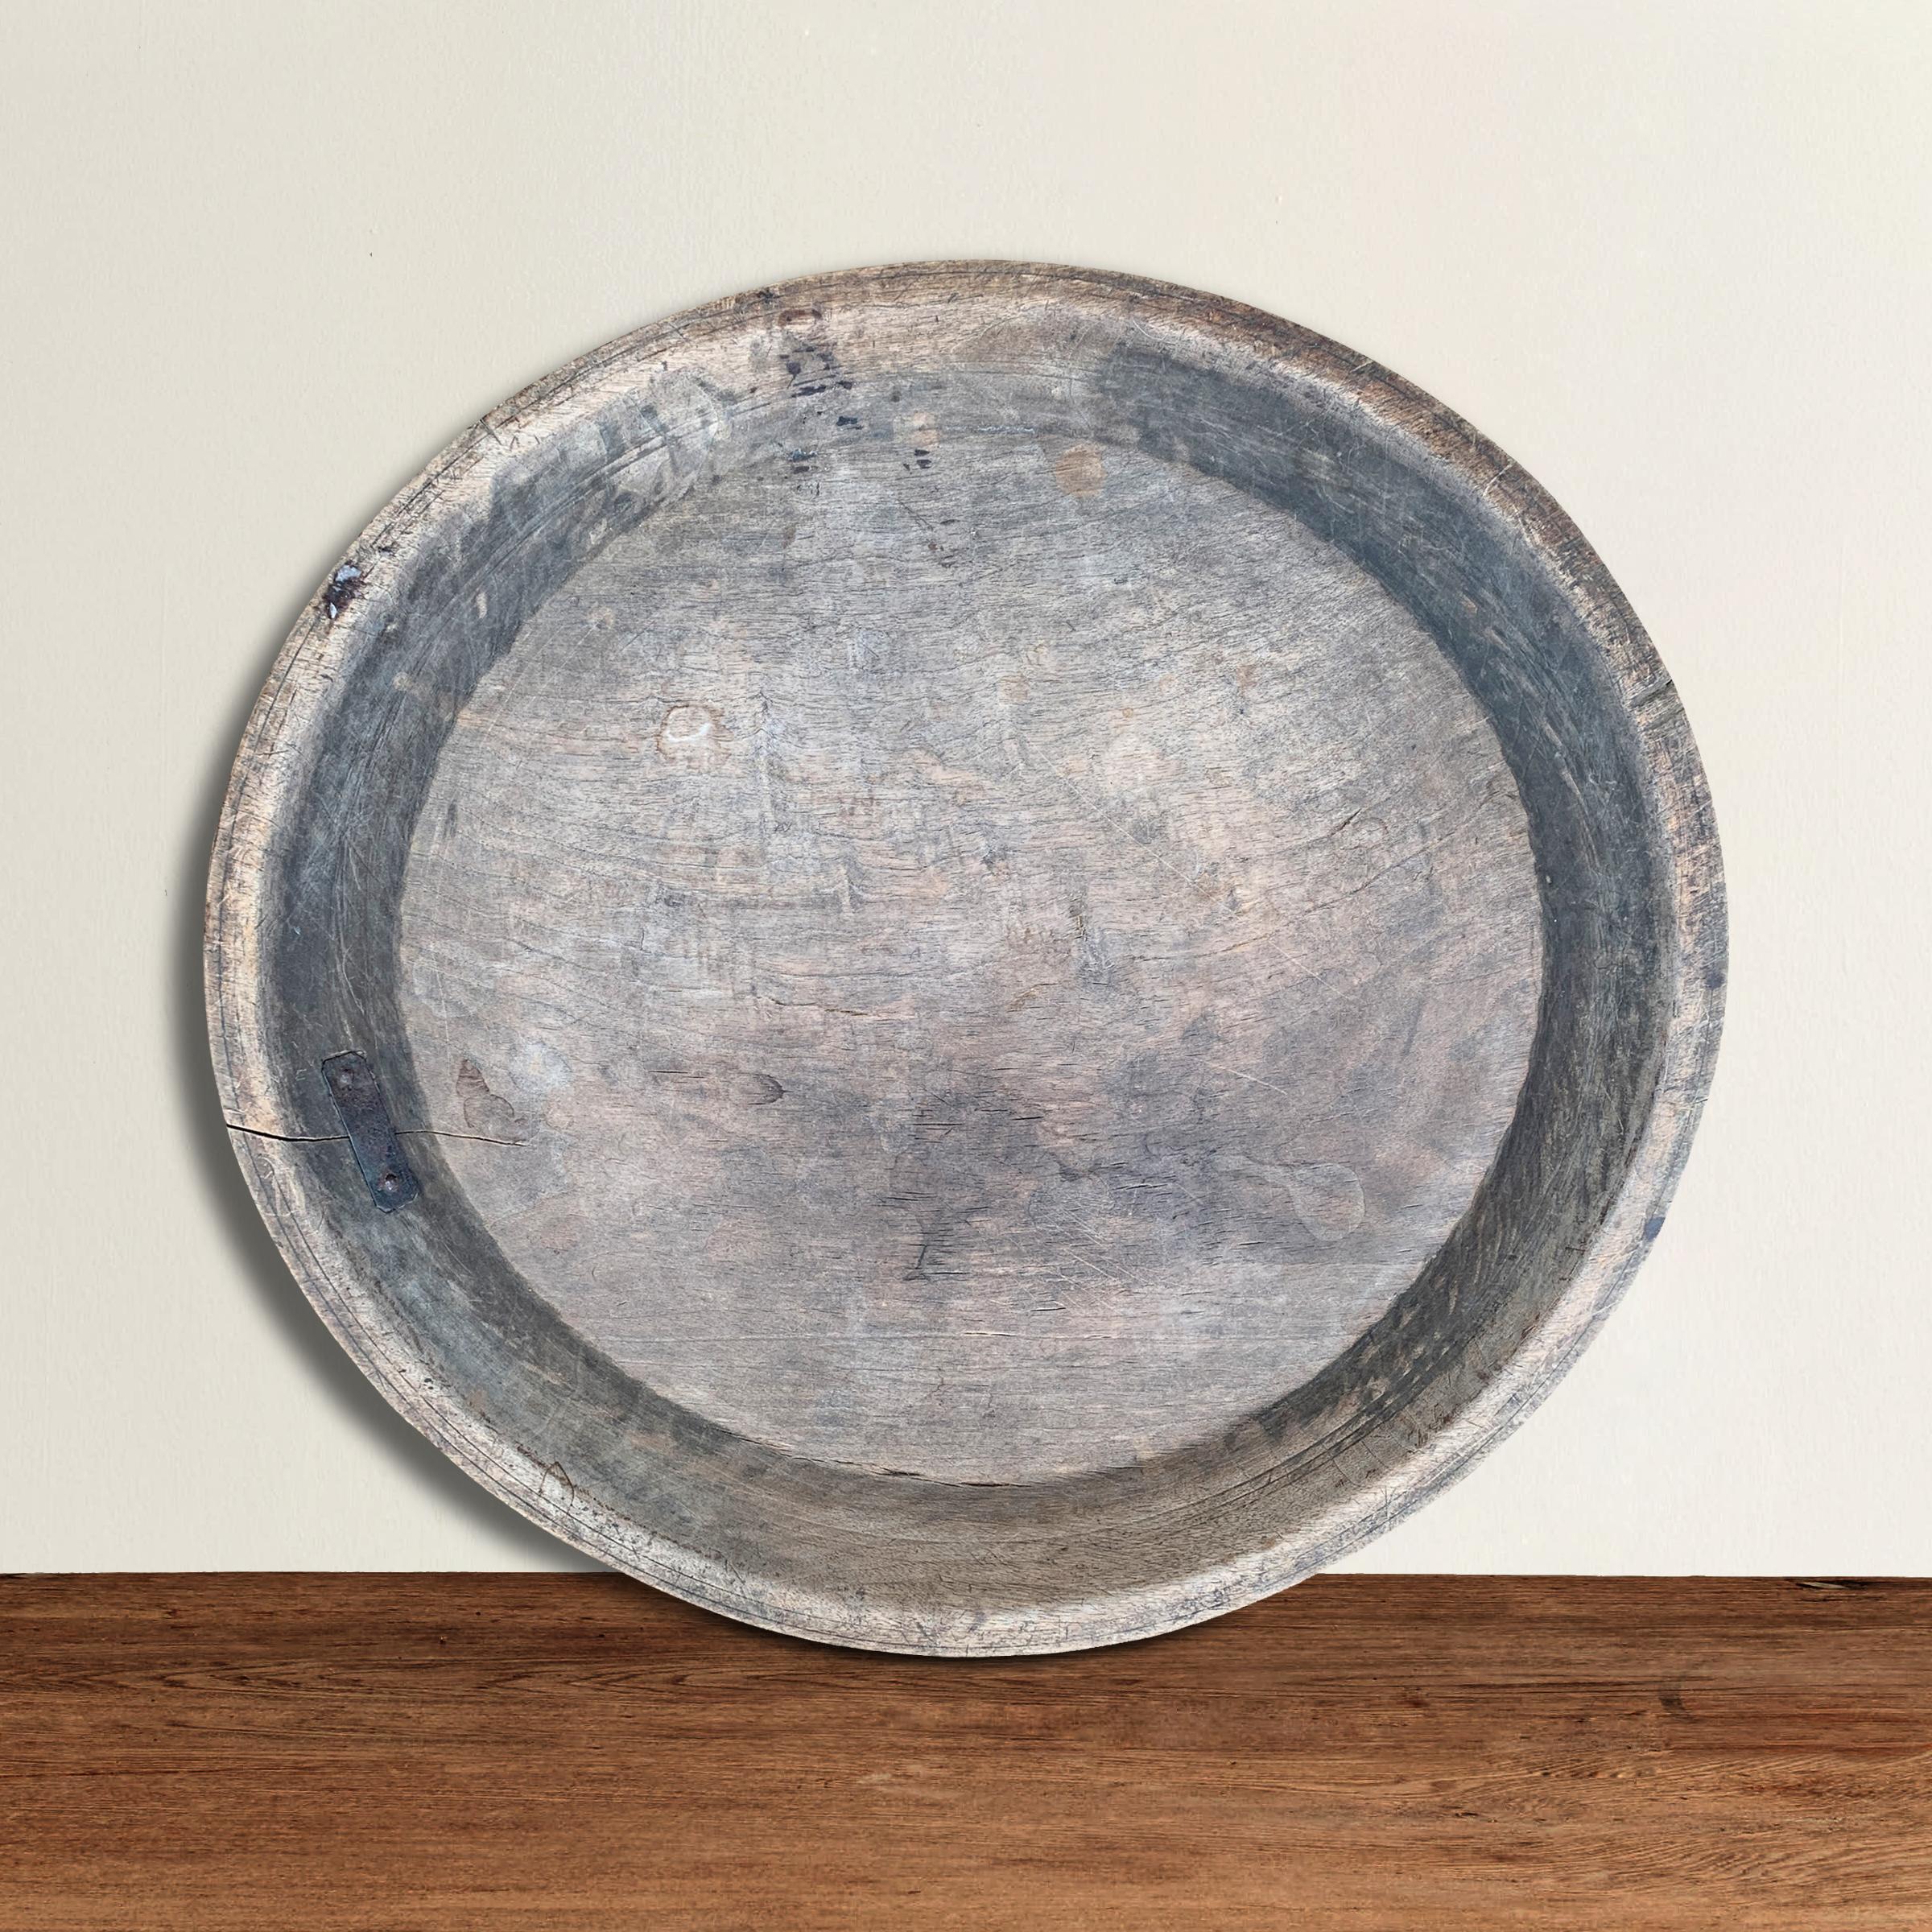 An incredible 18th century American turned wood platter with a wide rim, wonderful incised lines on the exterior, an old repair, and a weathered patina only time can provide.